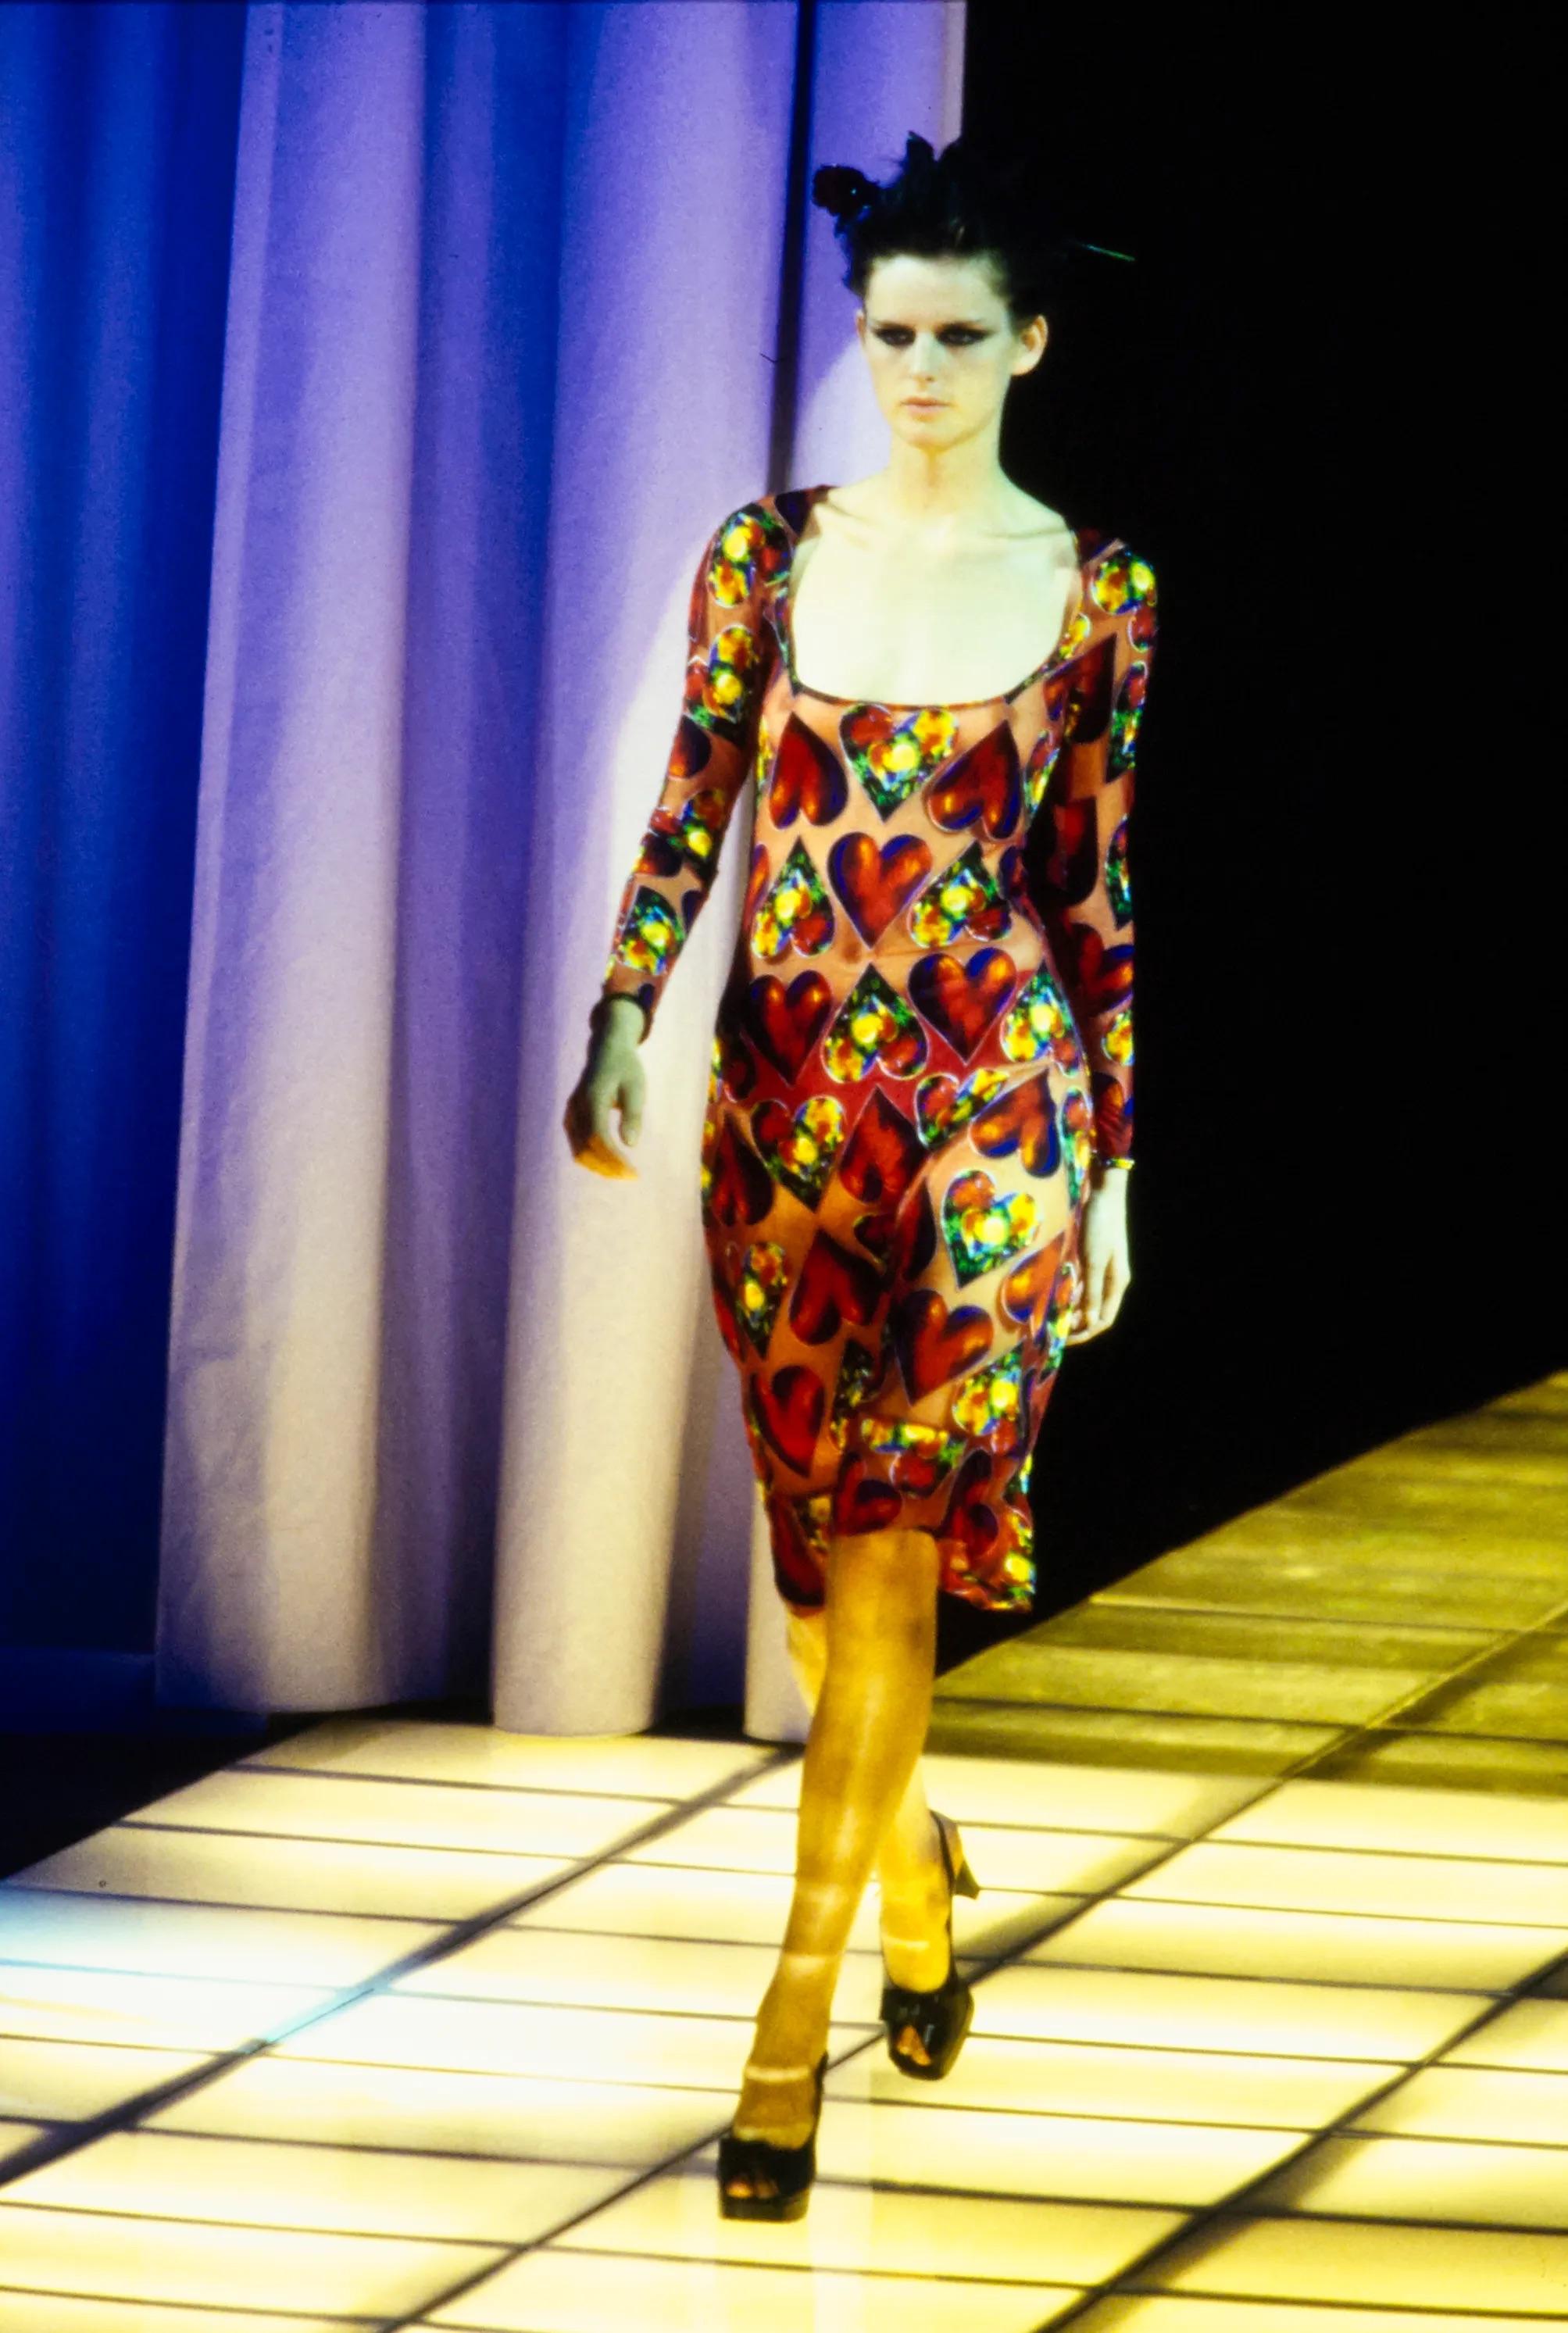 Presenting a fabulous red sheer Gianni Versace heart print dress, designed by Gianni Versace. From the Spring/Summer 1997 collection, this dress debuted on the season's runway as look 30, modeled by Stella Tennant. Featuring an exquisite interior